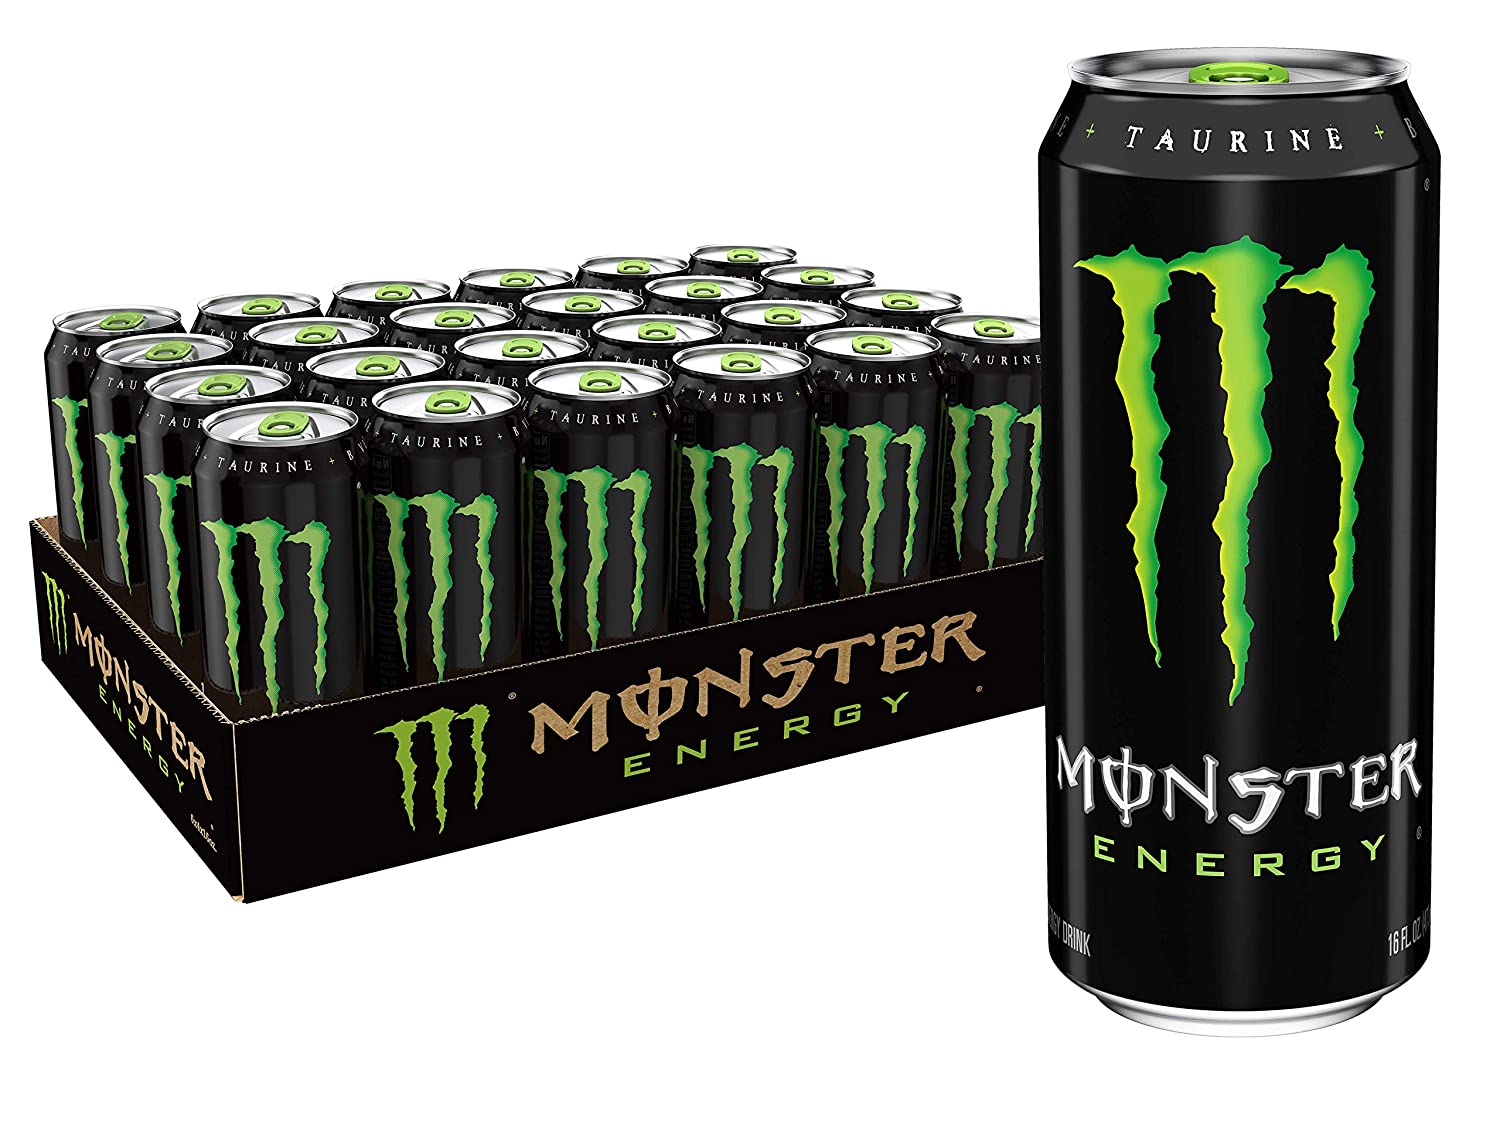 24-Pack 16-Oz Monster Energy Drink Green (Original) $25.19 w/ S&S + Free Shipping w/ Prime or on orders over $25